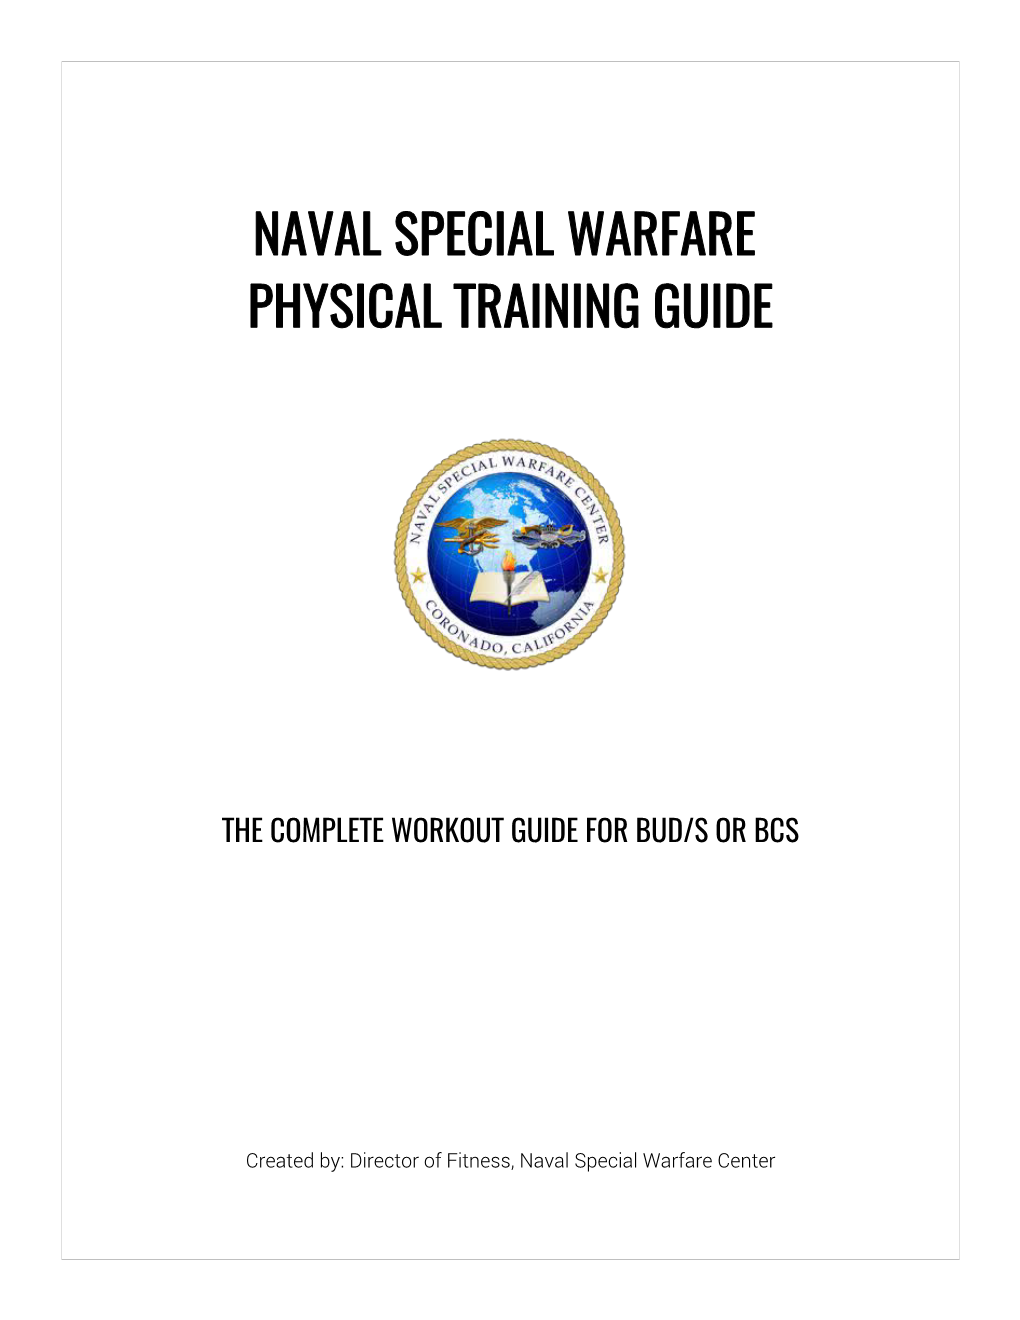 SEAL SWCC Physical Training Guide